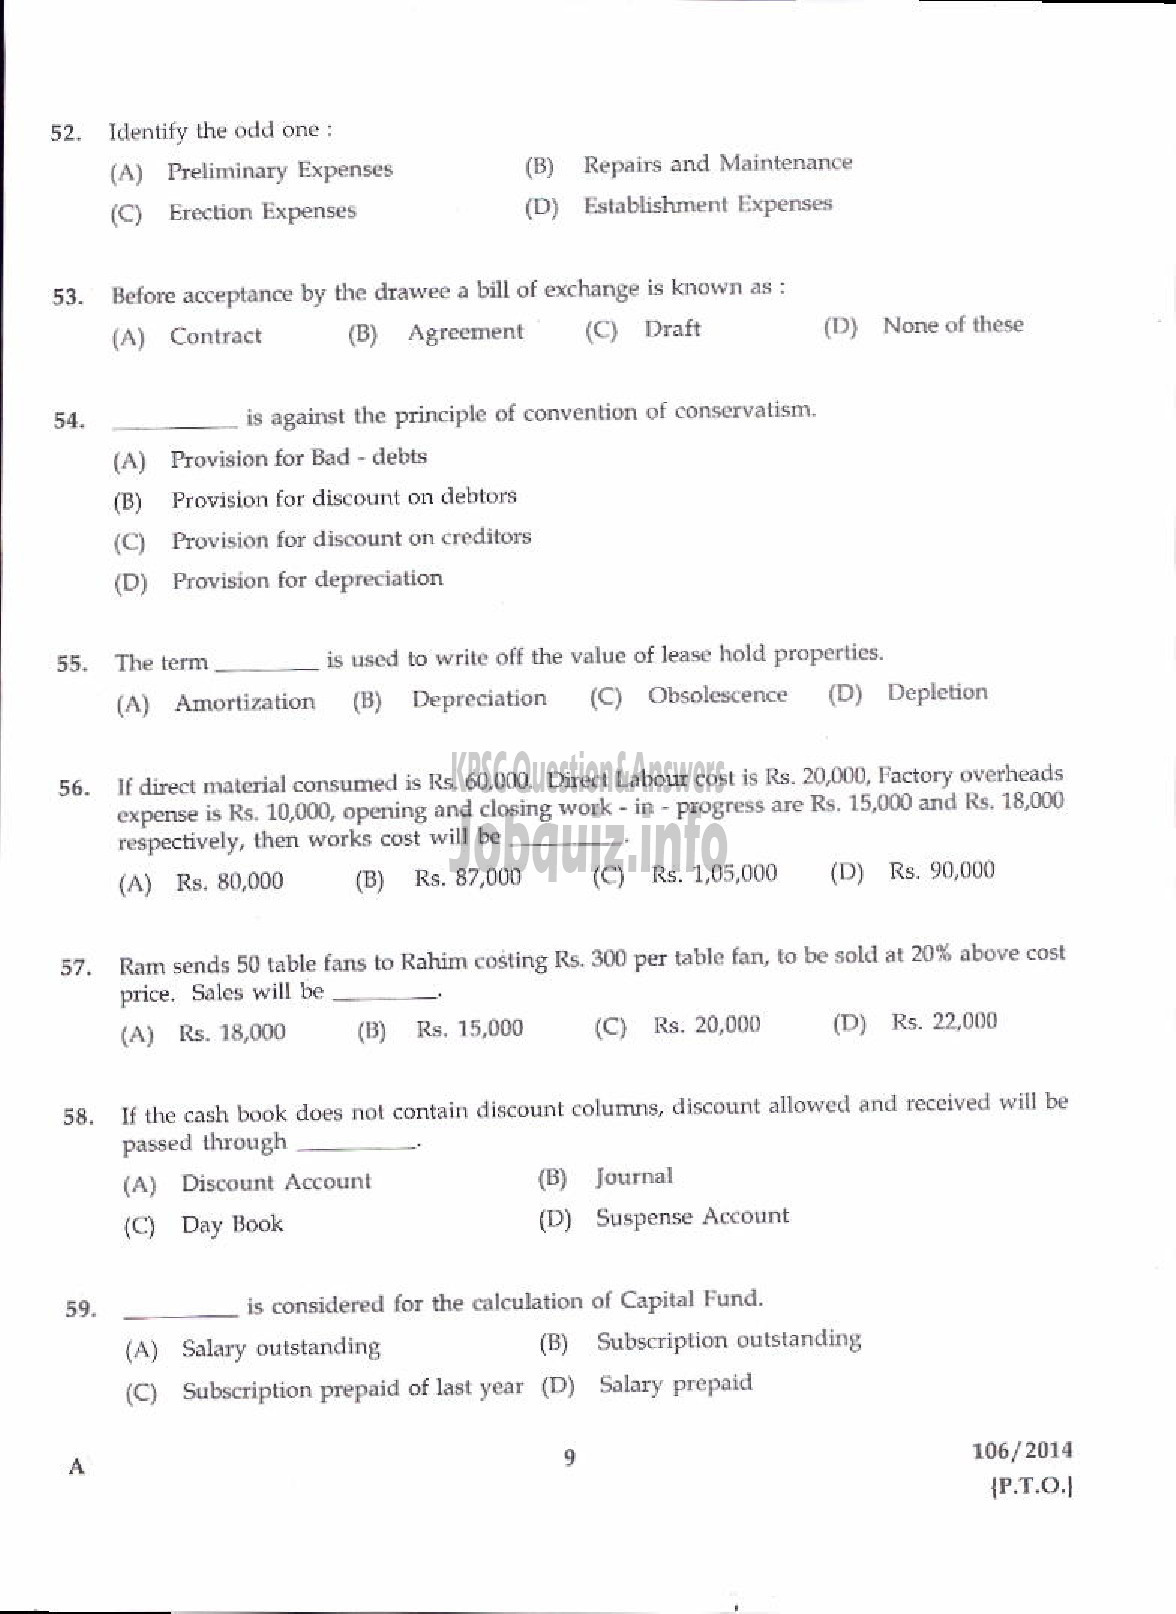 Kerala PSC Question Paper - DIVISIONAL ACCOUNTANT KERALA WATER AUTHORITY PRELIMINARY TEST-7